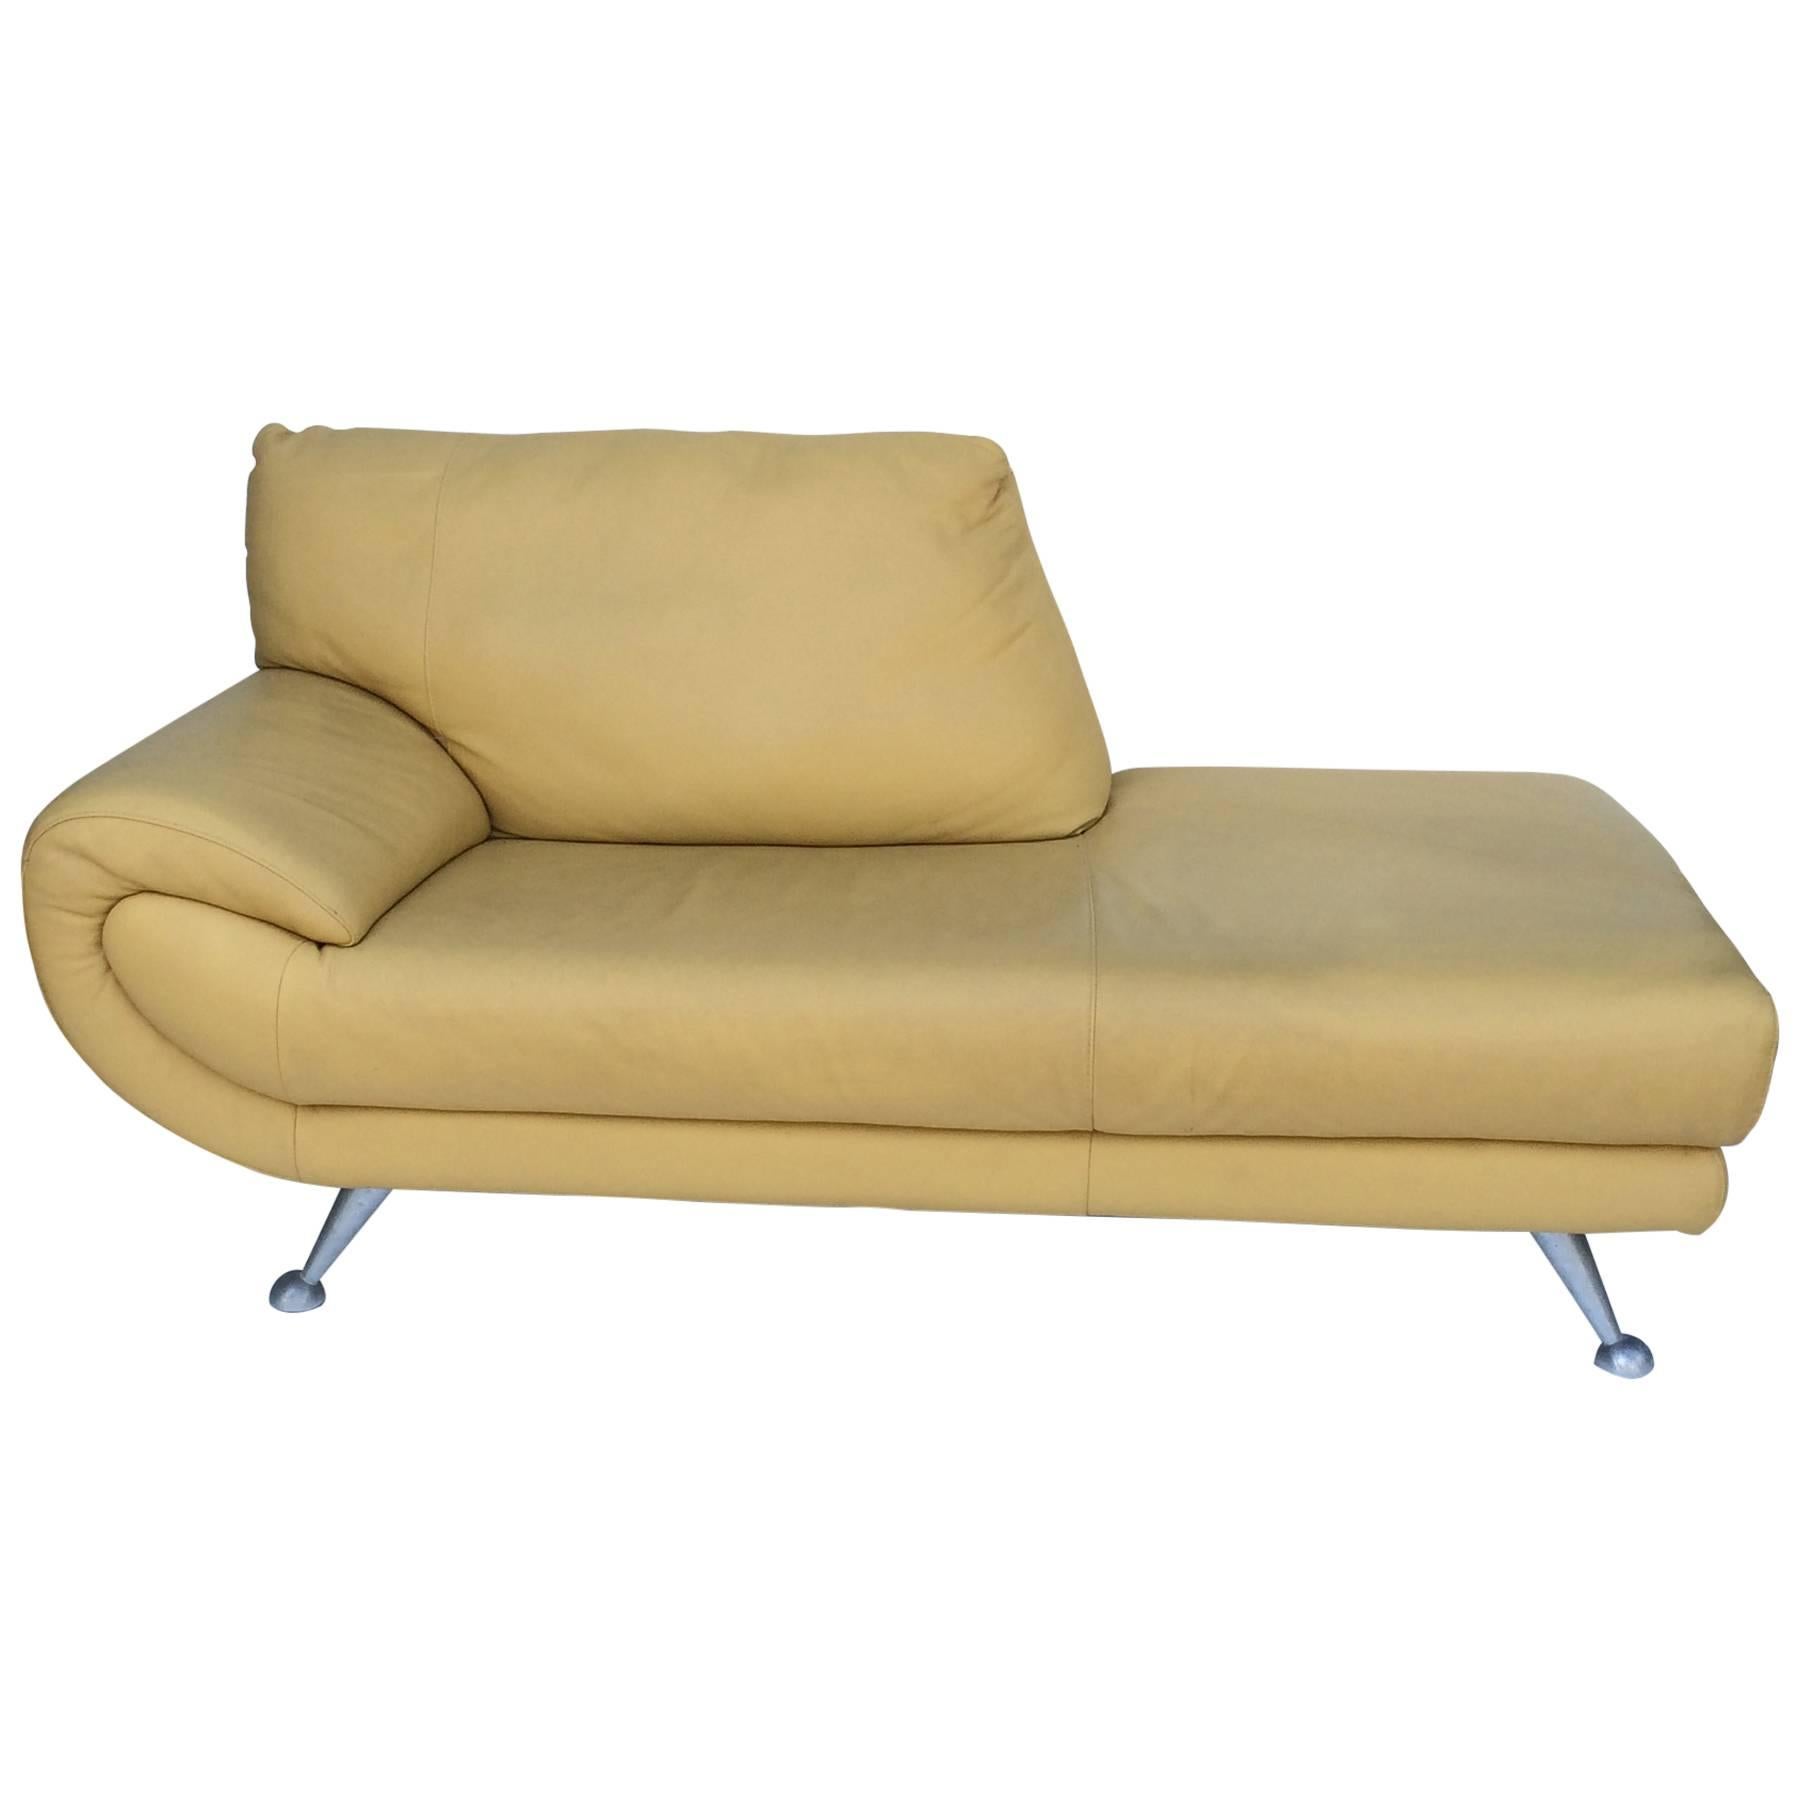 Nicoletti Leather Chaise Lounge